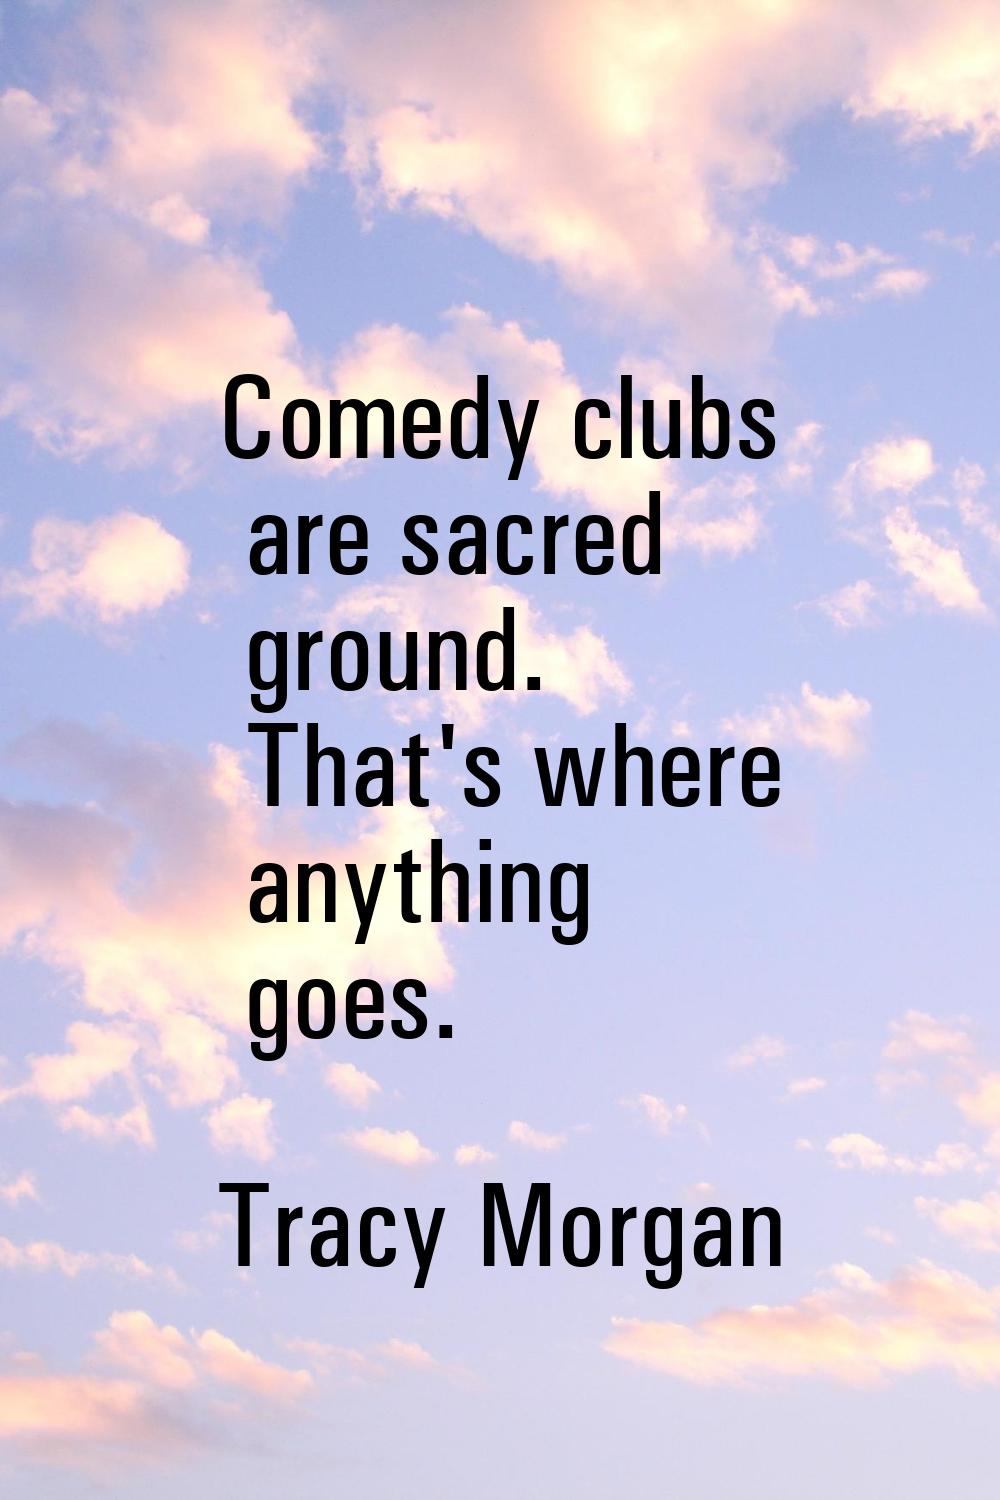 Comedy clubs are sacred ground. That's where anything goes.